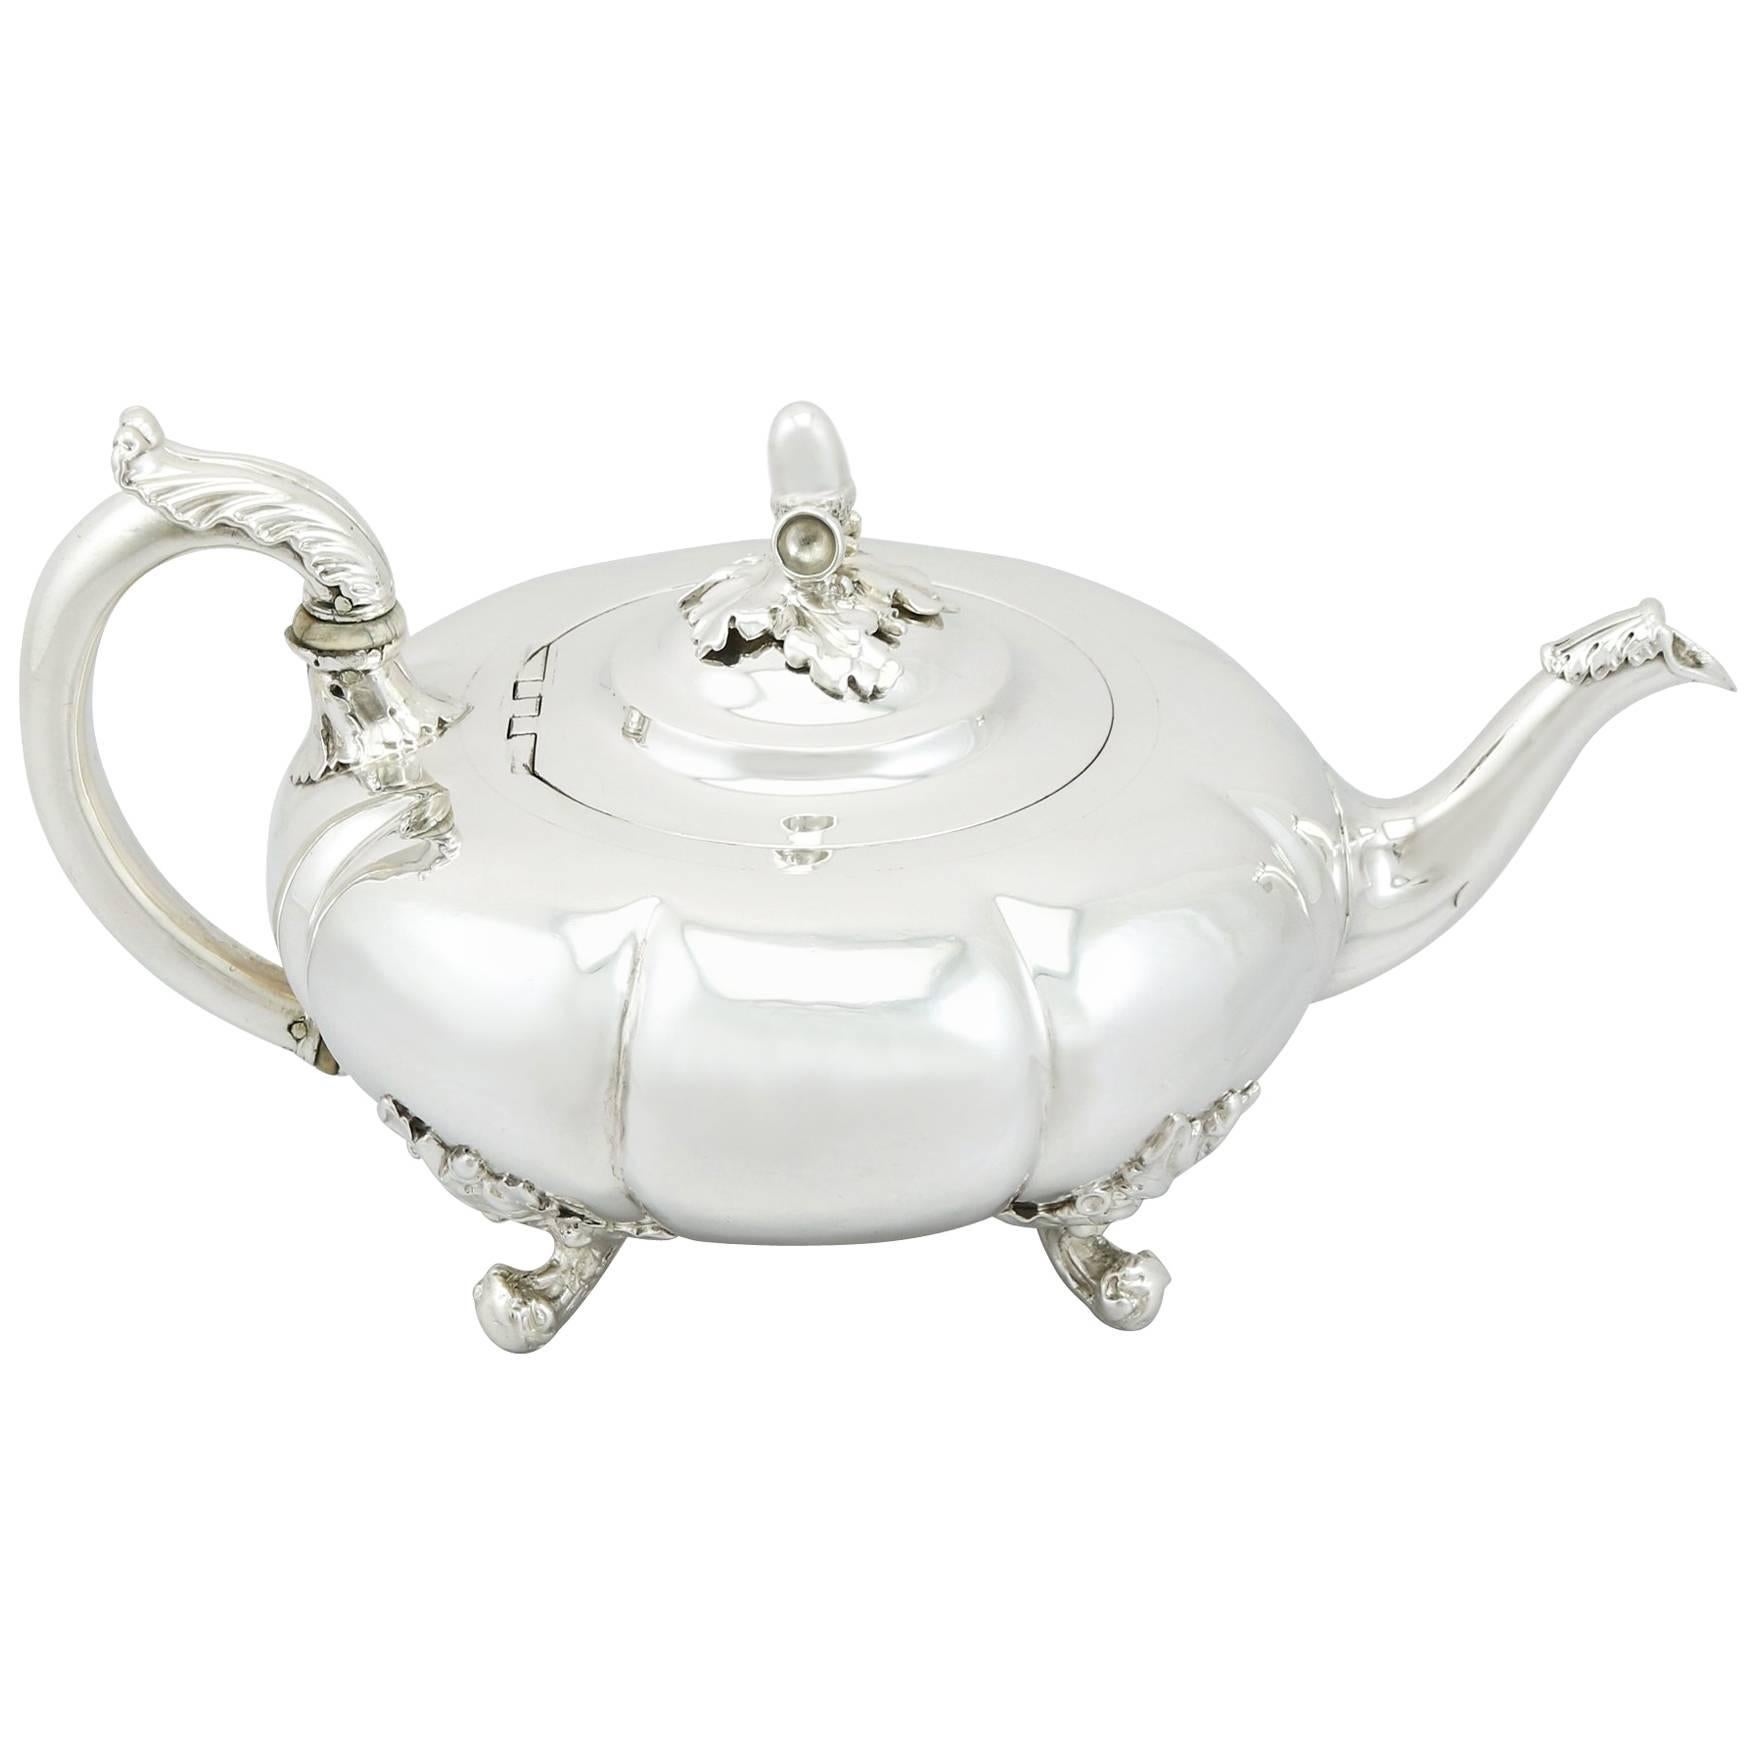 1837 Antique Victorian Sterling Silver Teapot